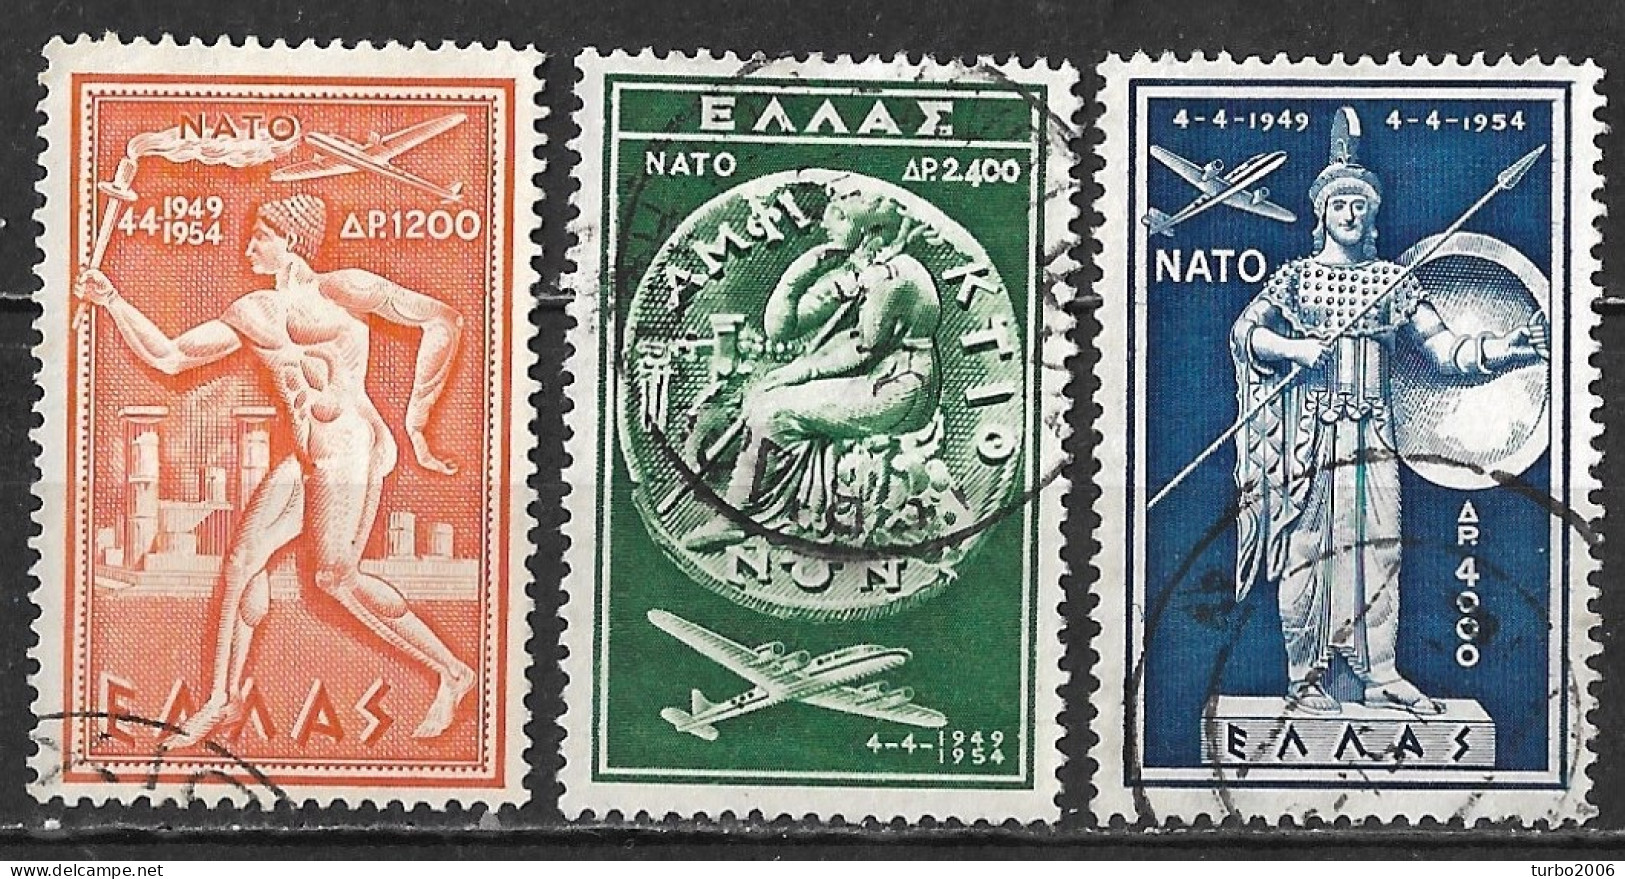 GREECE 1954 5th Anniversary Of NATO Complete Used Set Vl. A 70 / A 72 - Gebraucht